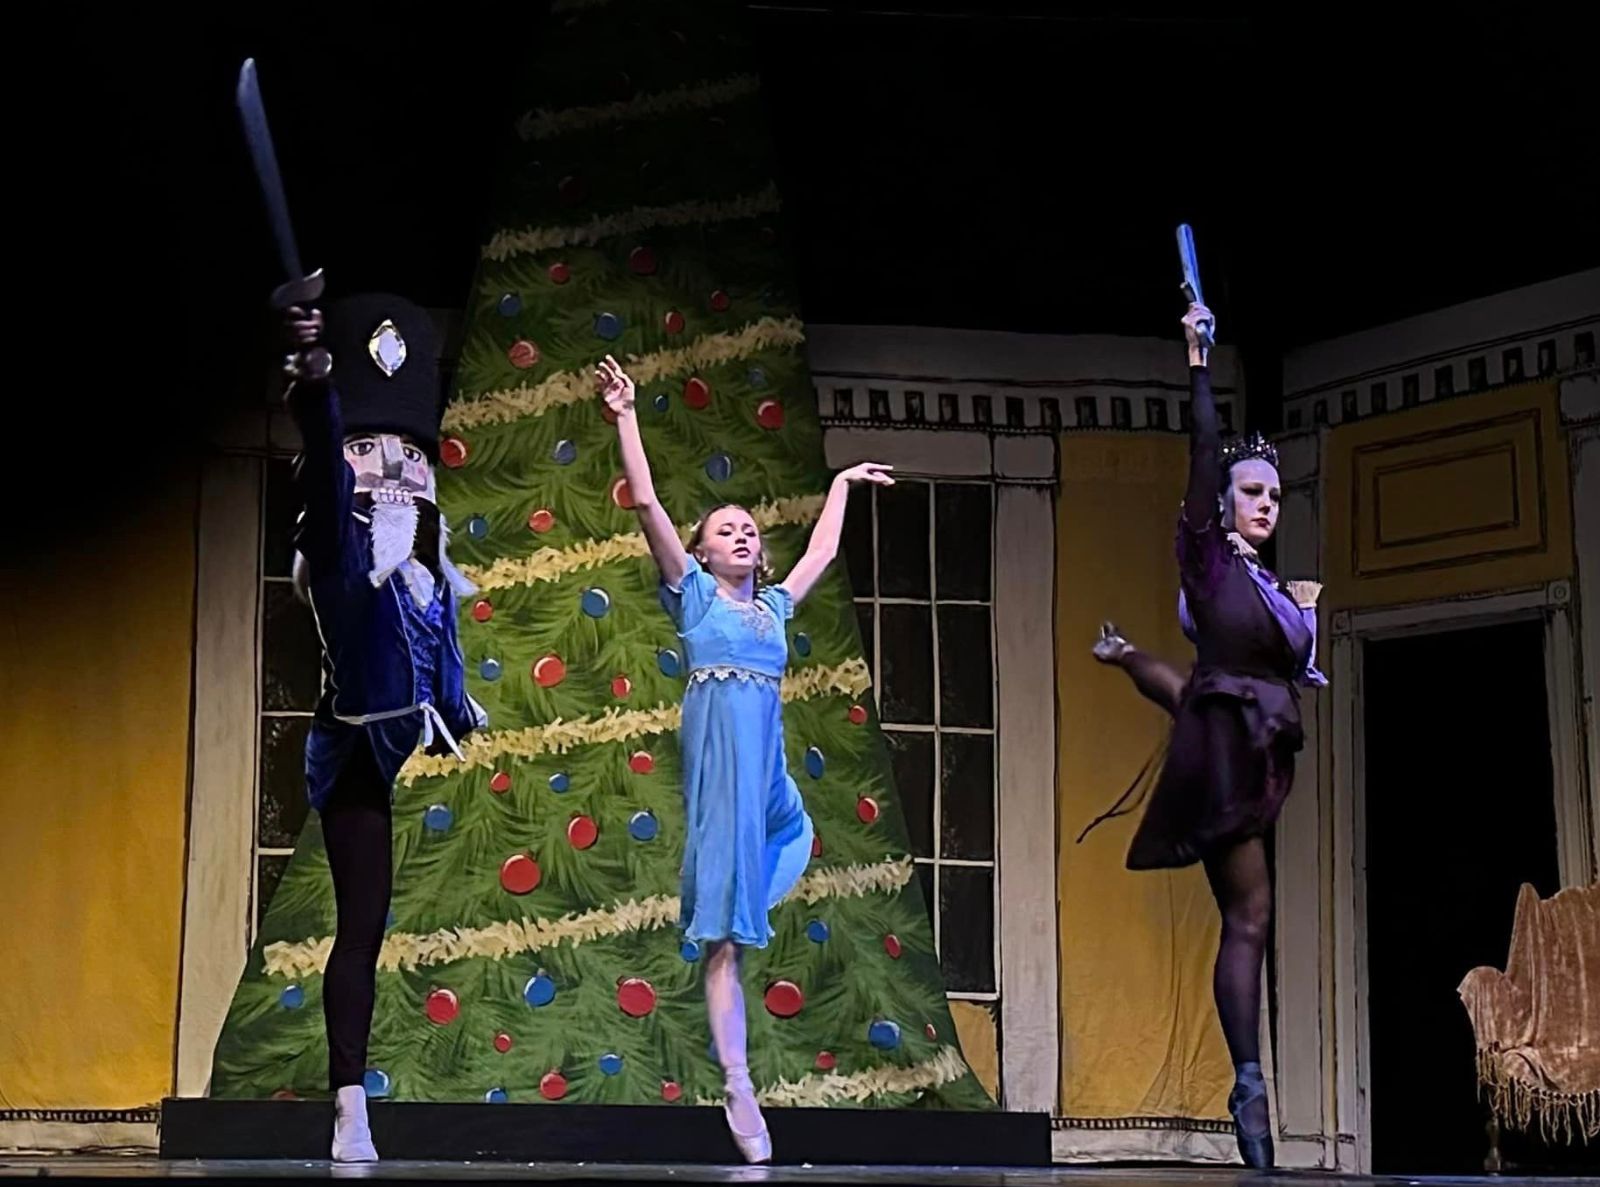 Three ballet dancers as The Nutcracker, Clara, and the Rat Queen in a scene from